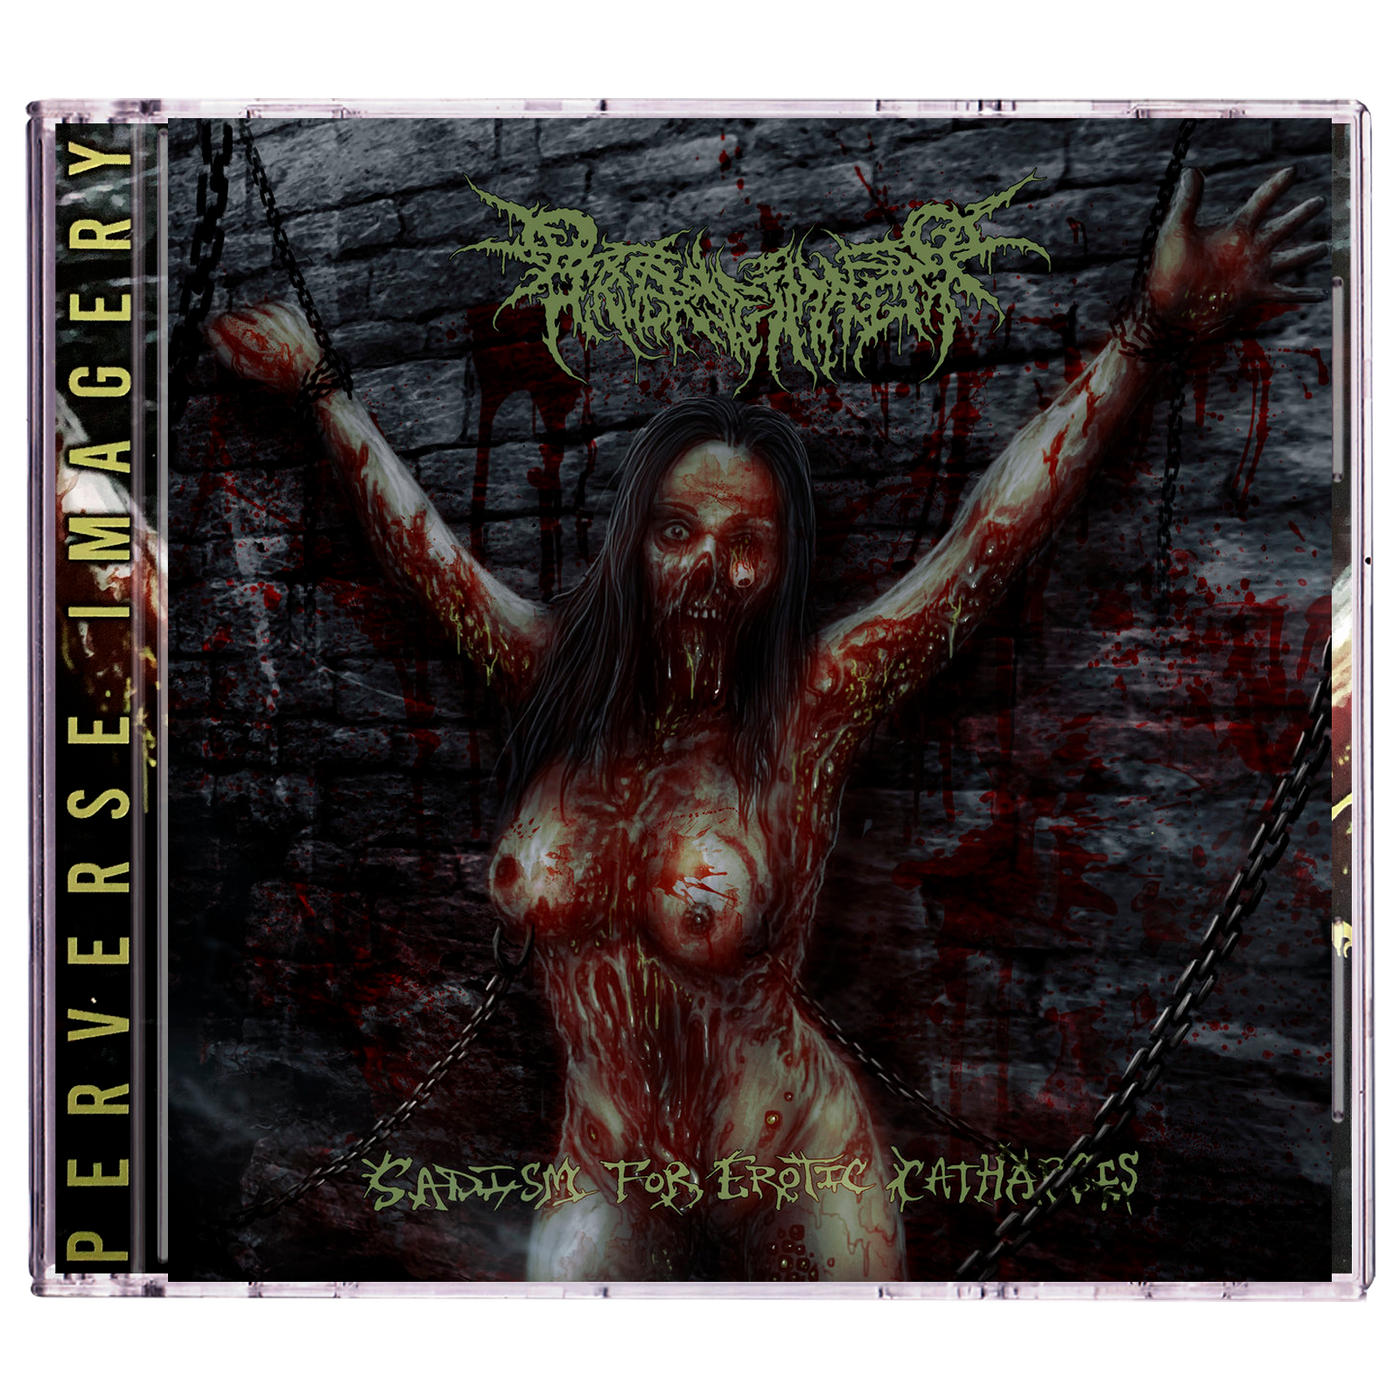 Perverse Imagery 'Sadism for Erotic Catharsis' CD